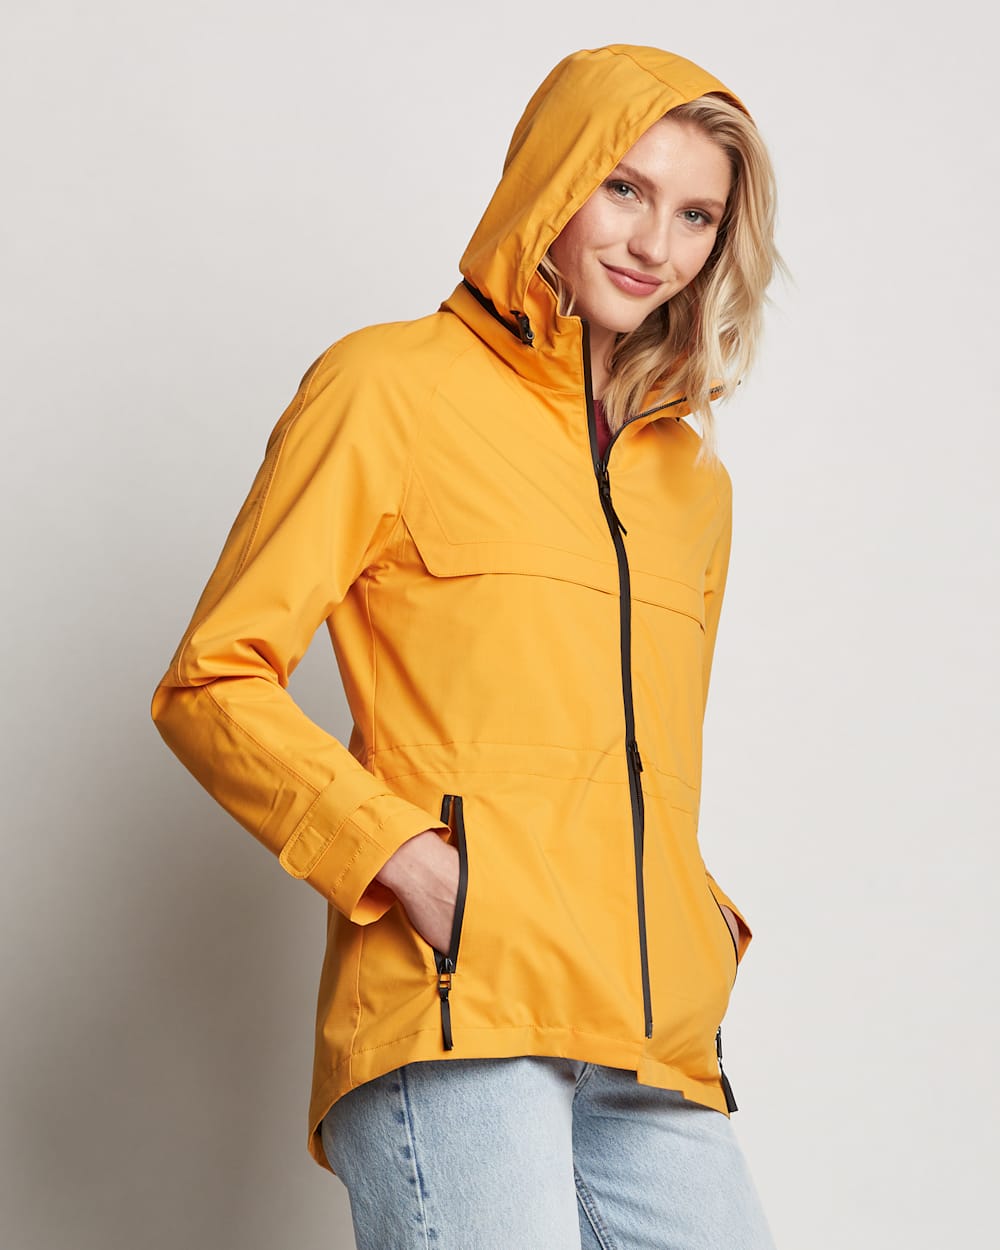 ALTERNATE VIEW OF WOMEN'S PARADISE RIPSTOP JACKET IN SUNSET image number 4